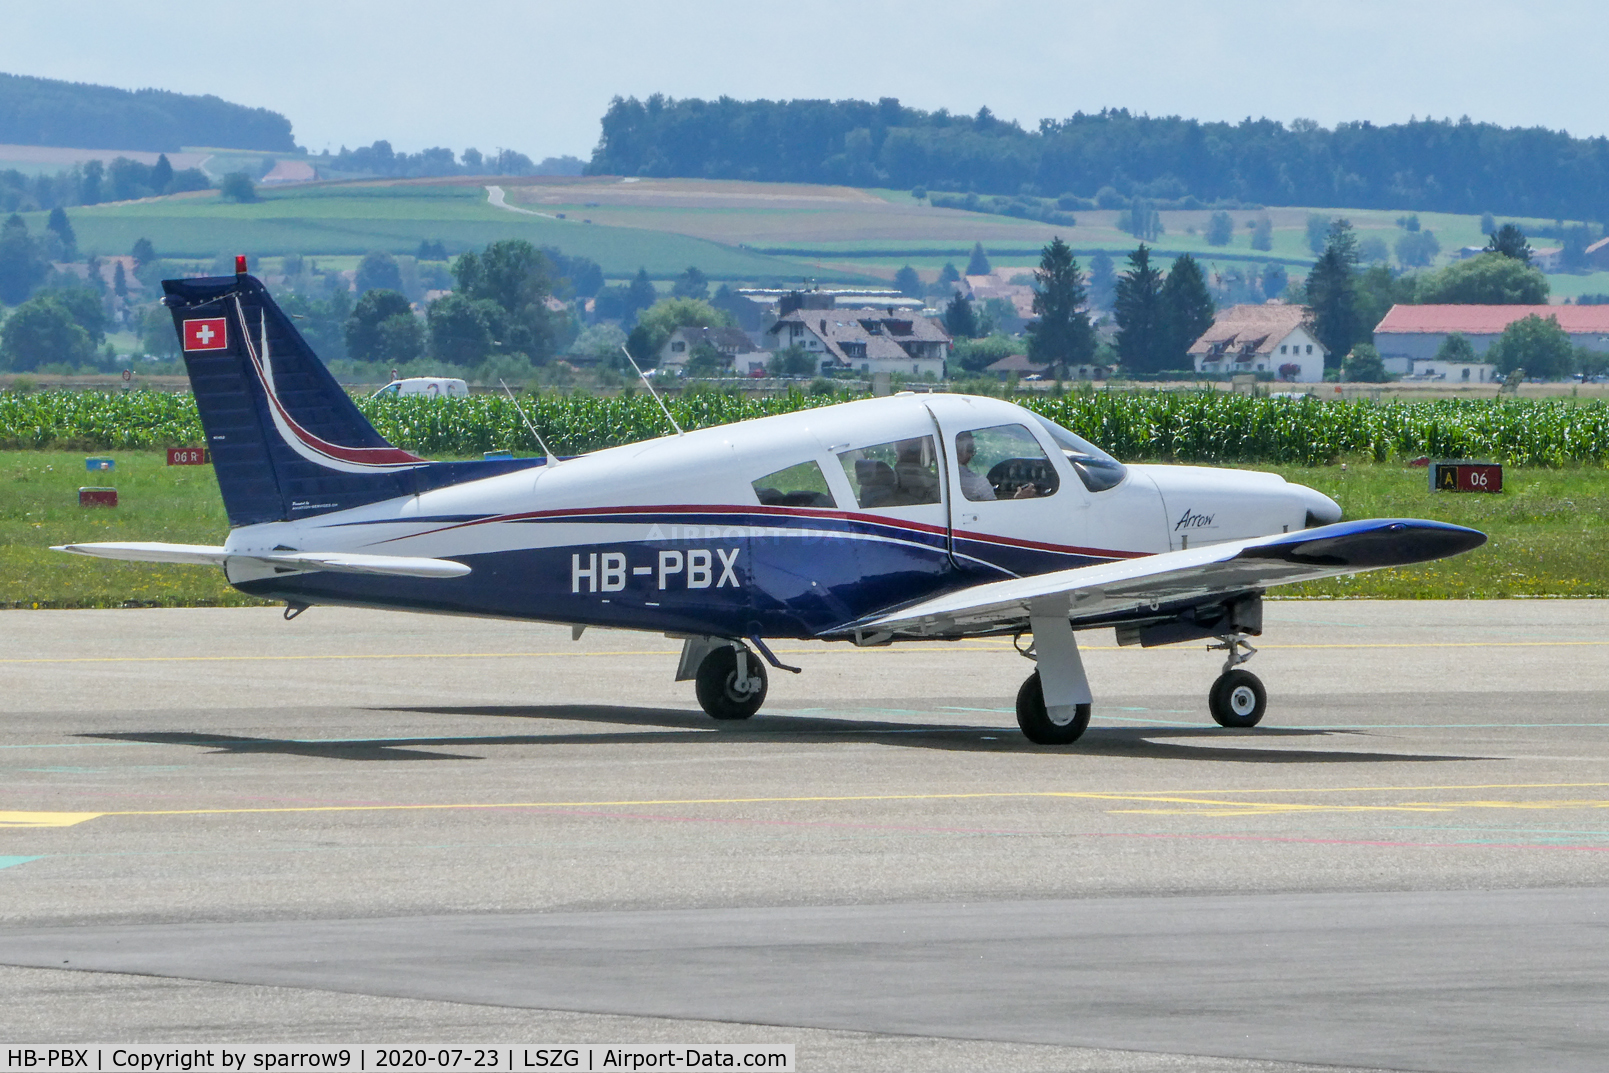 HB-PBX, 1971 Piper PA-28R-200 Cherokee Arrow B C/N 28R-7135207, At Grenchen.New paint-scheme. HB-registered since 1977-05-23